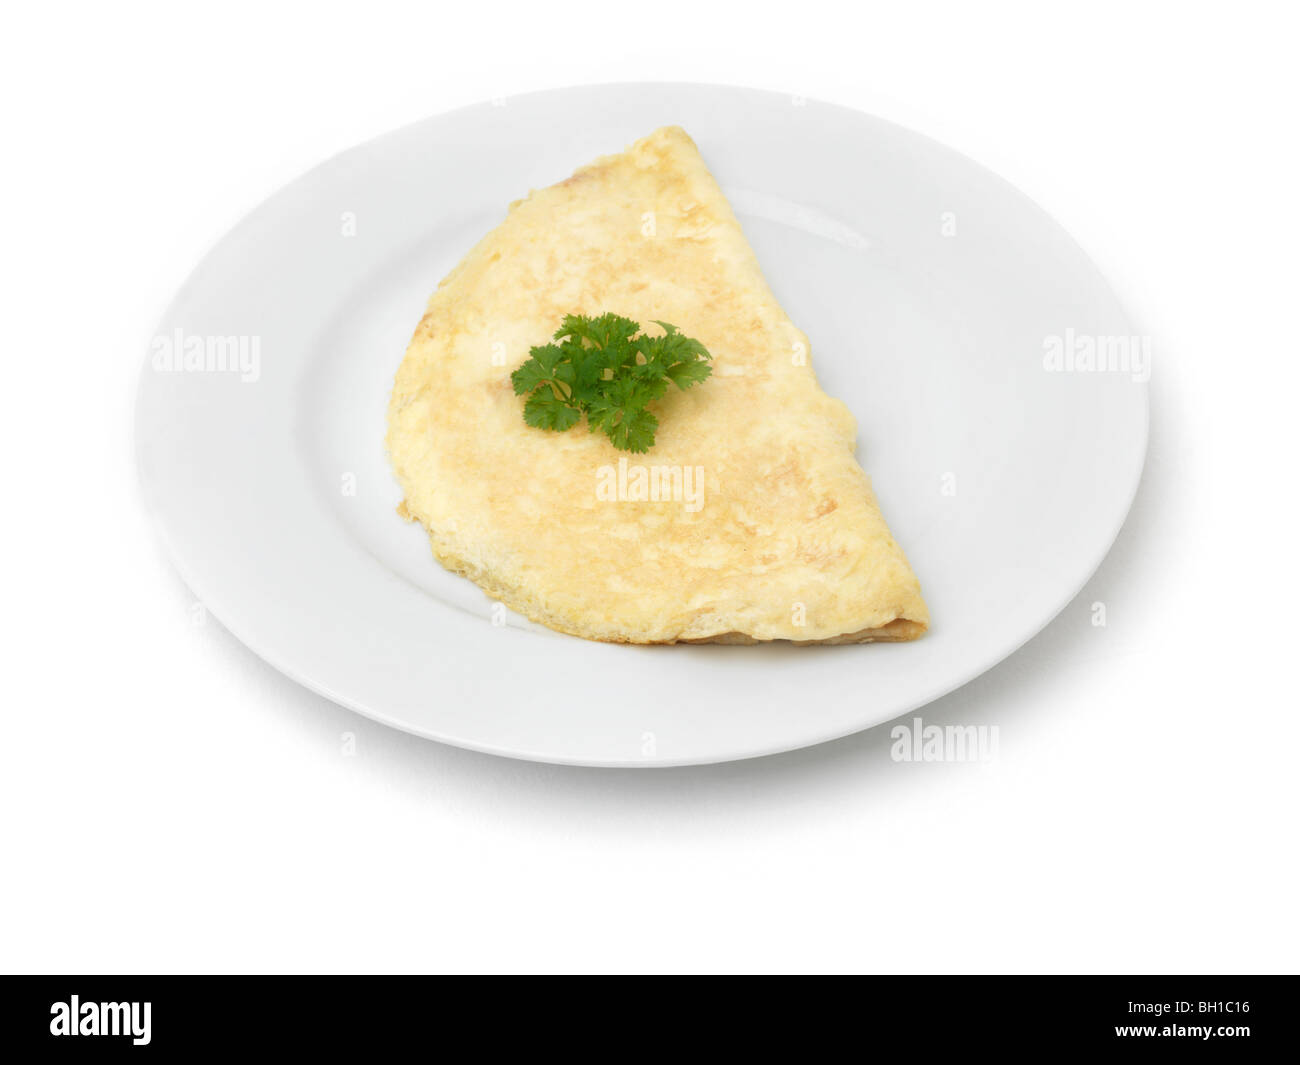 A Plate with Omelette and a bit of Garnish Stock Photo